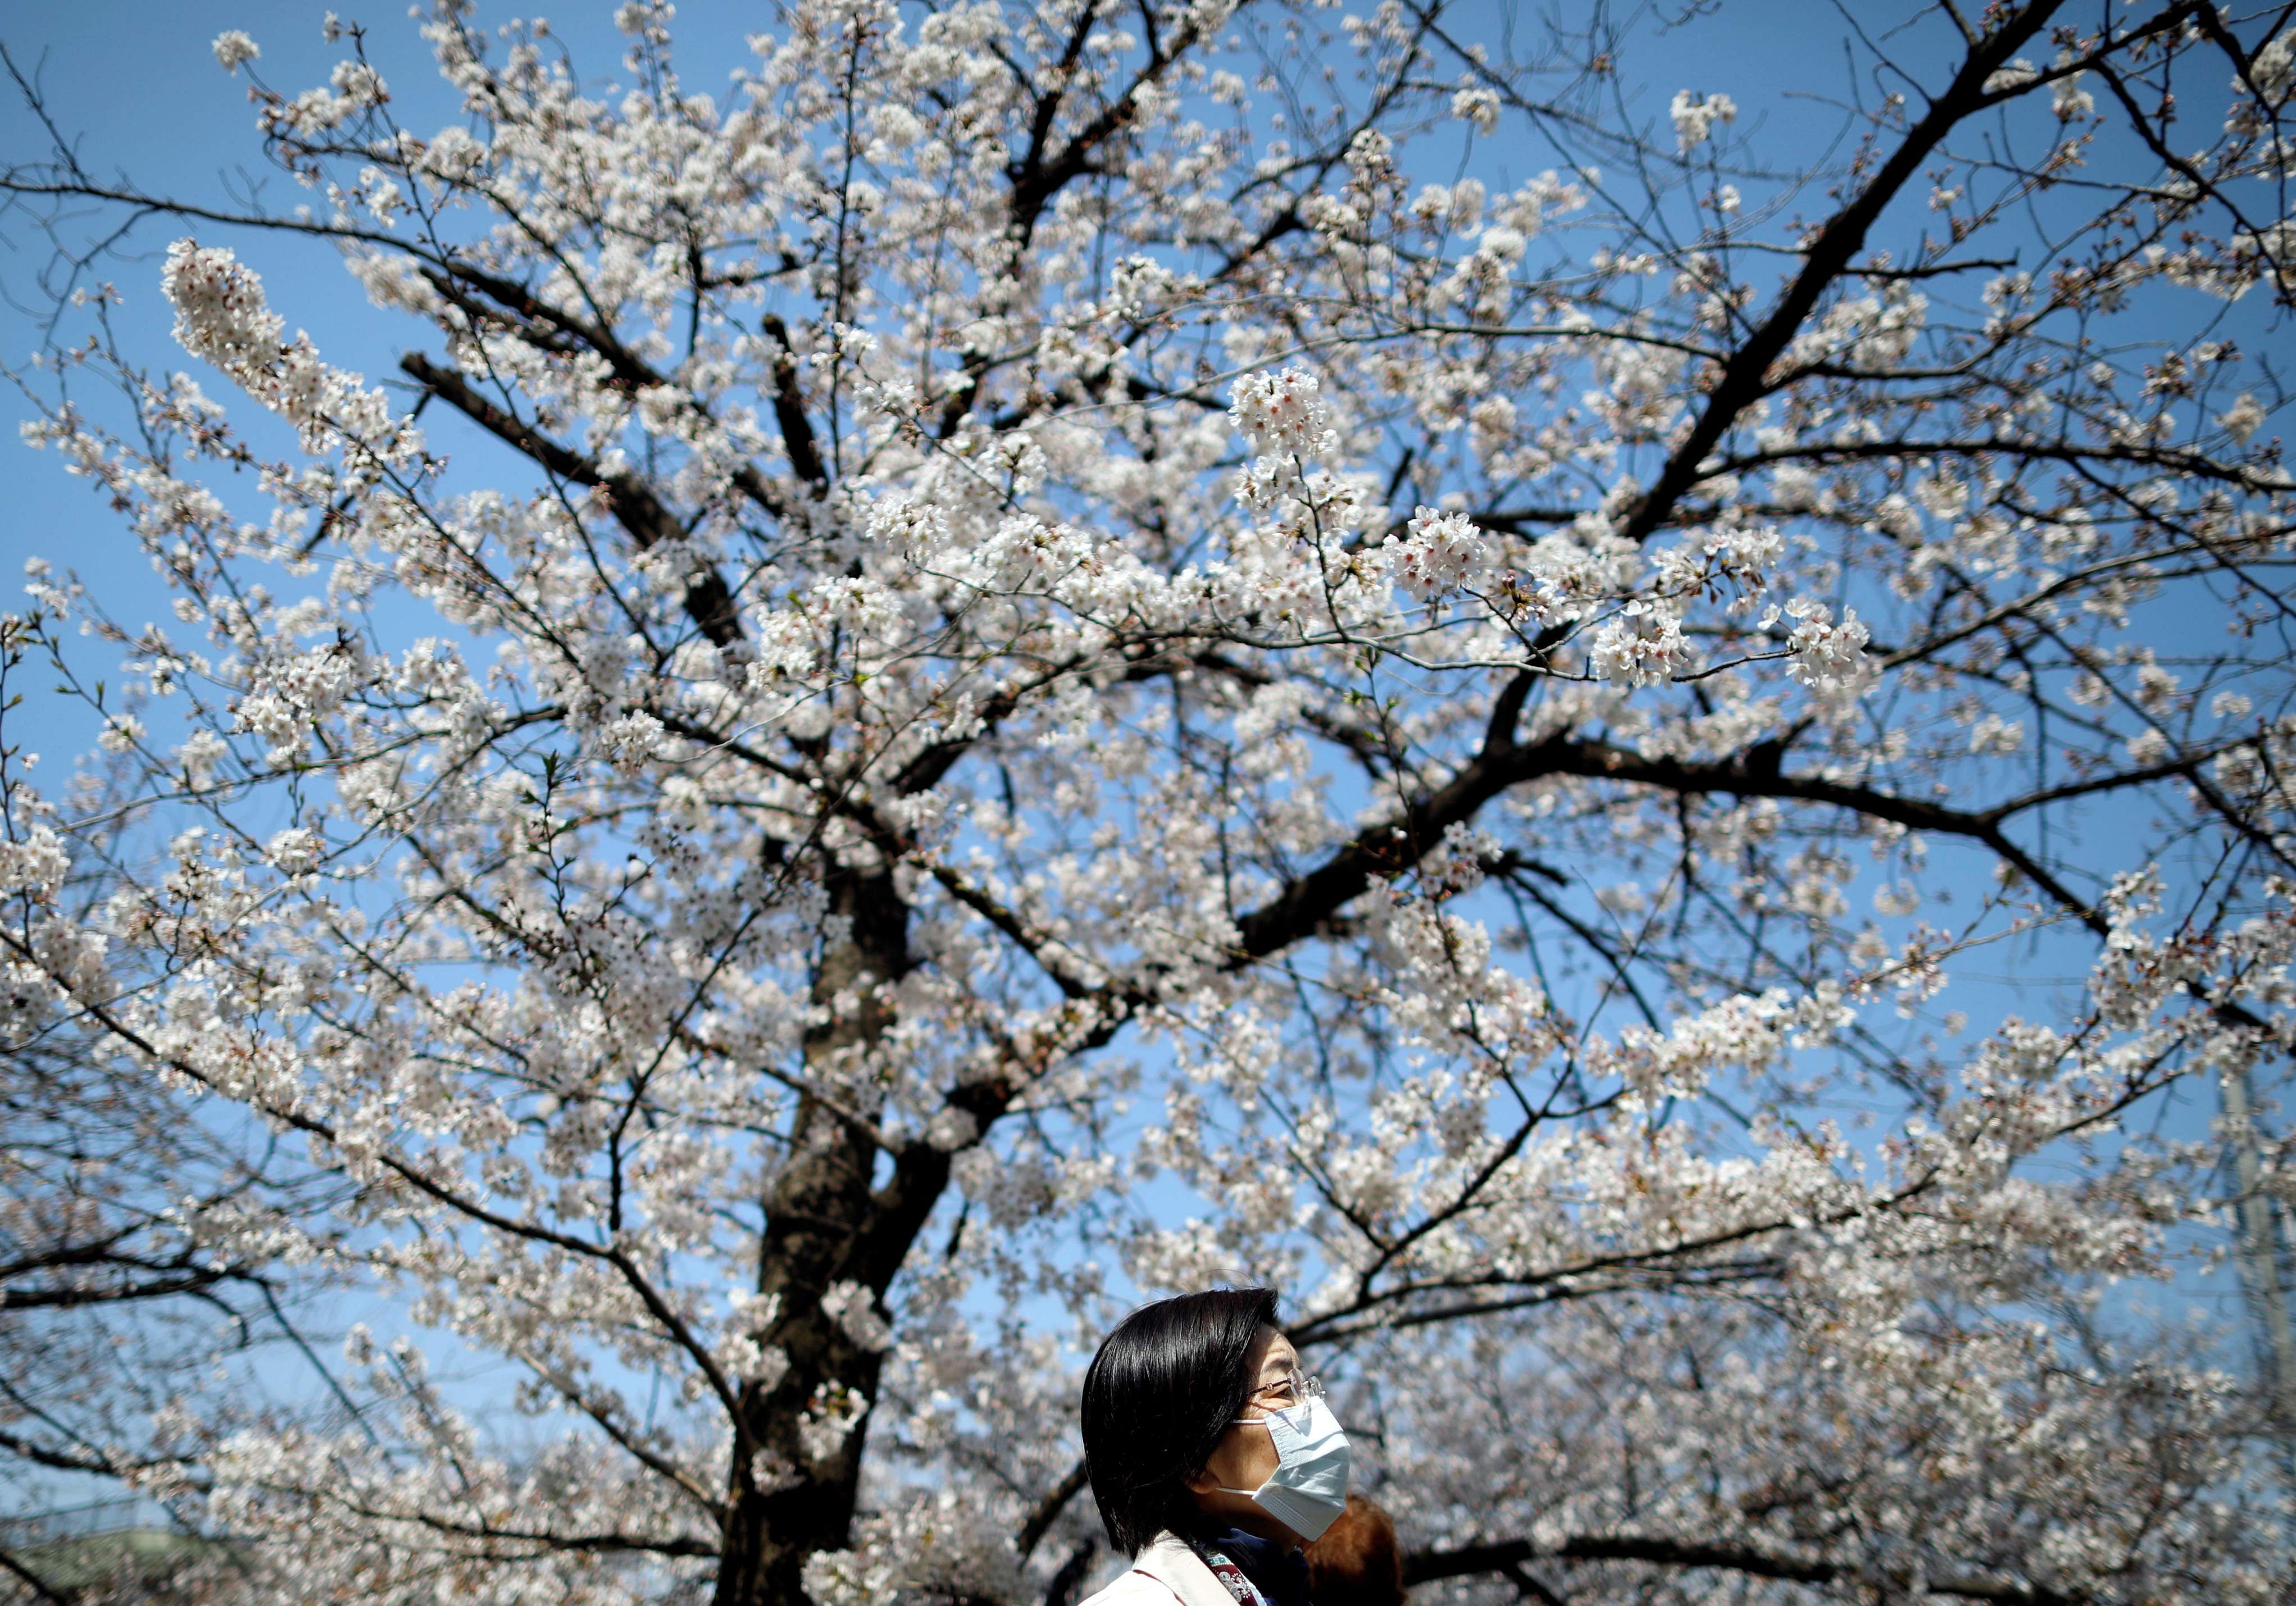 A woman wearing a protective face mask following an outbreak of the coronavirus disease (COVID-19) walks past under blooming cherry blossoms in Tokyo. (Credit: Reuters)